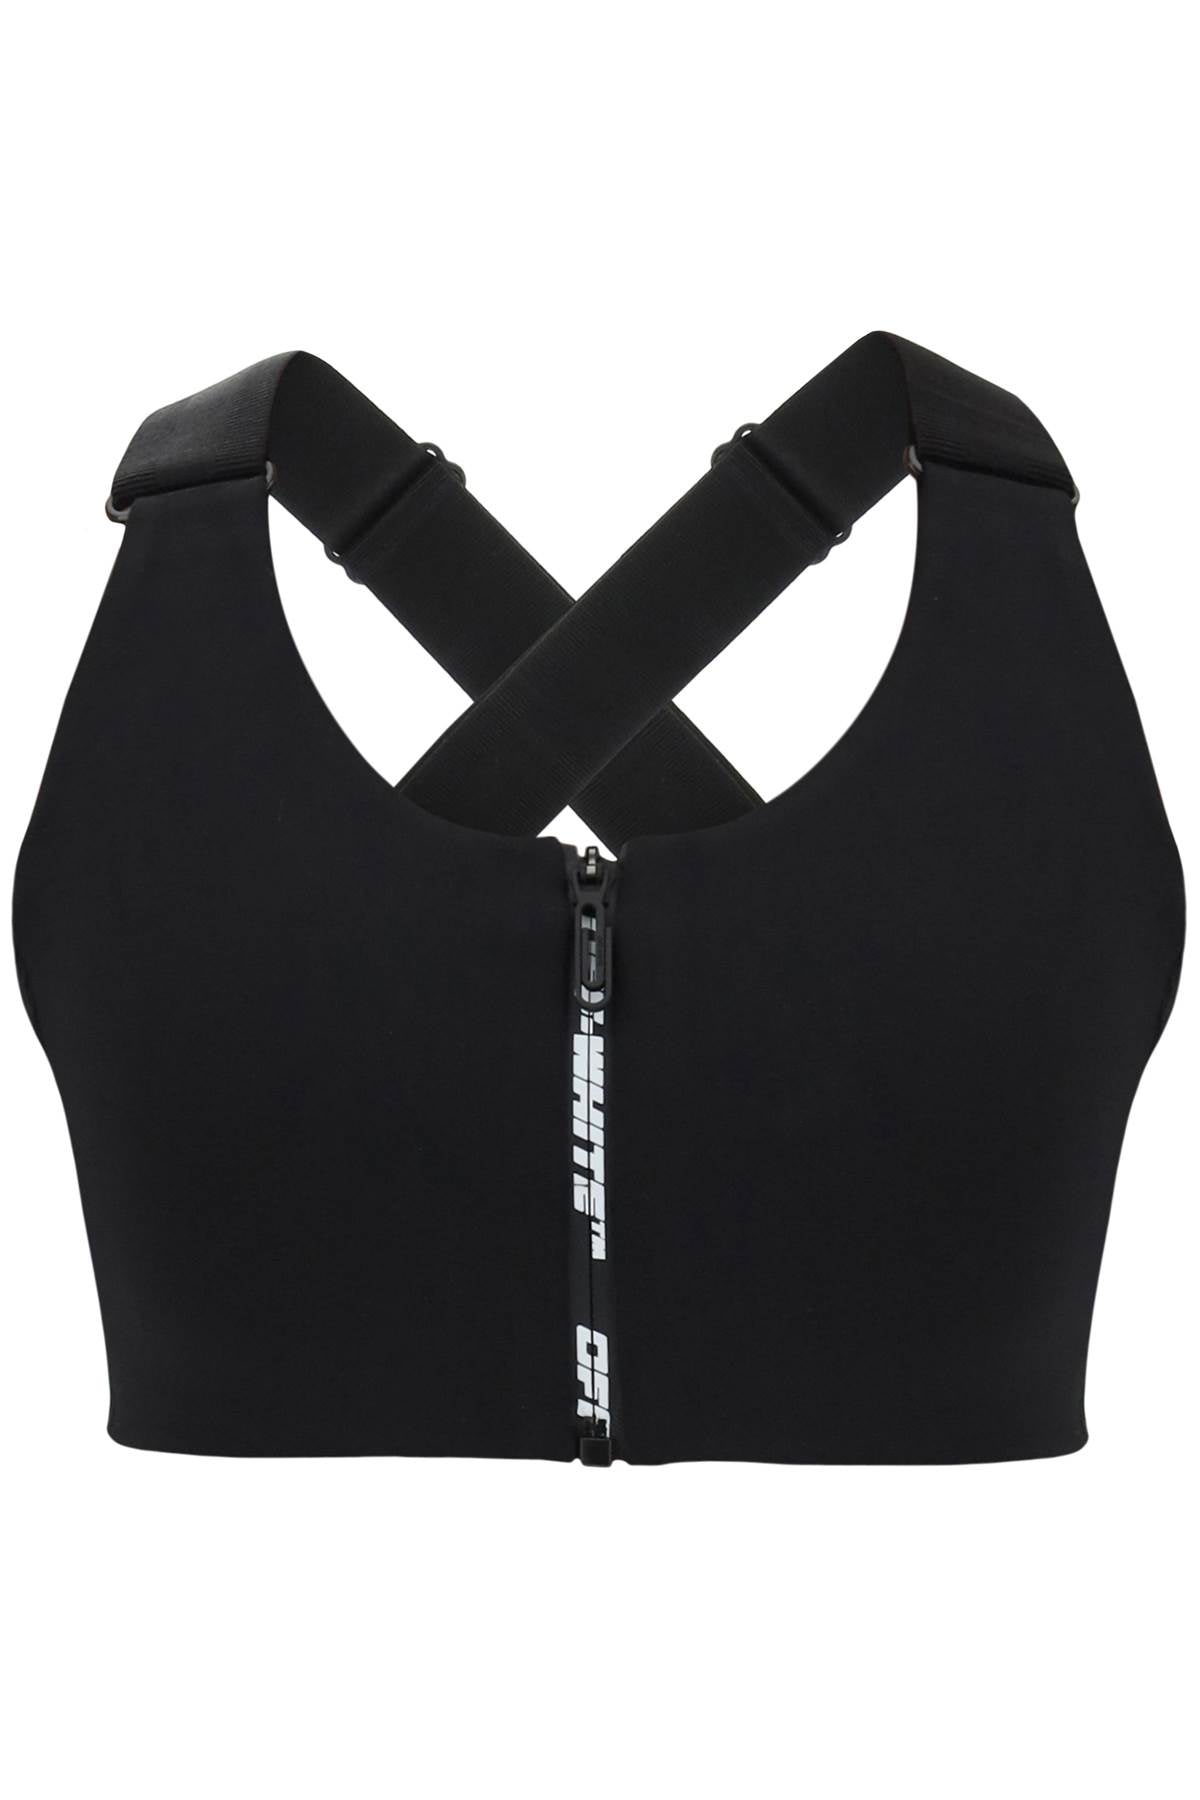 Off-white sporty crop top-0